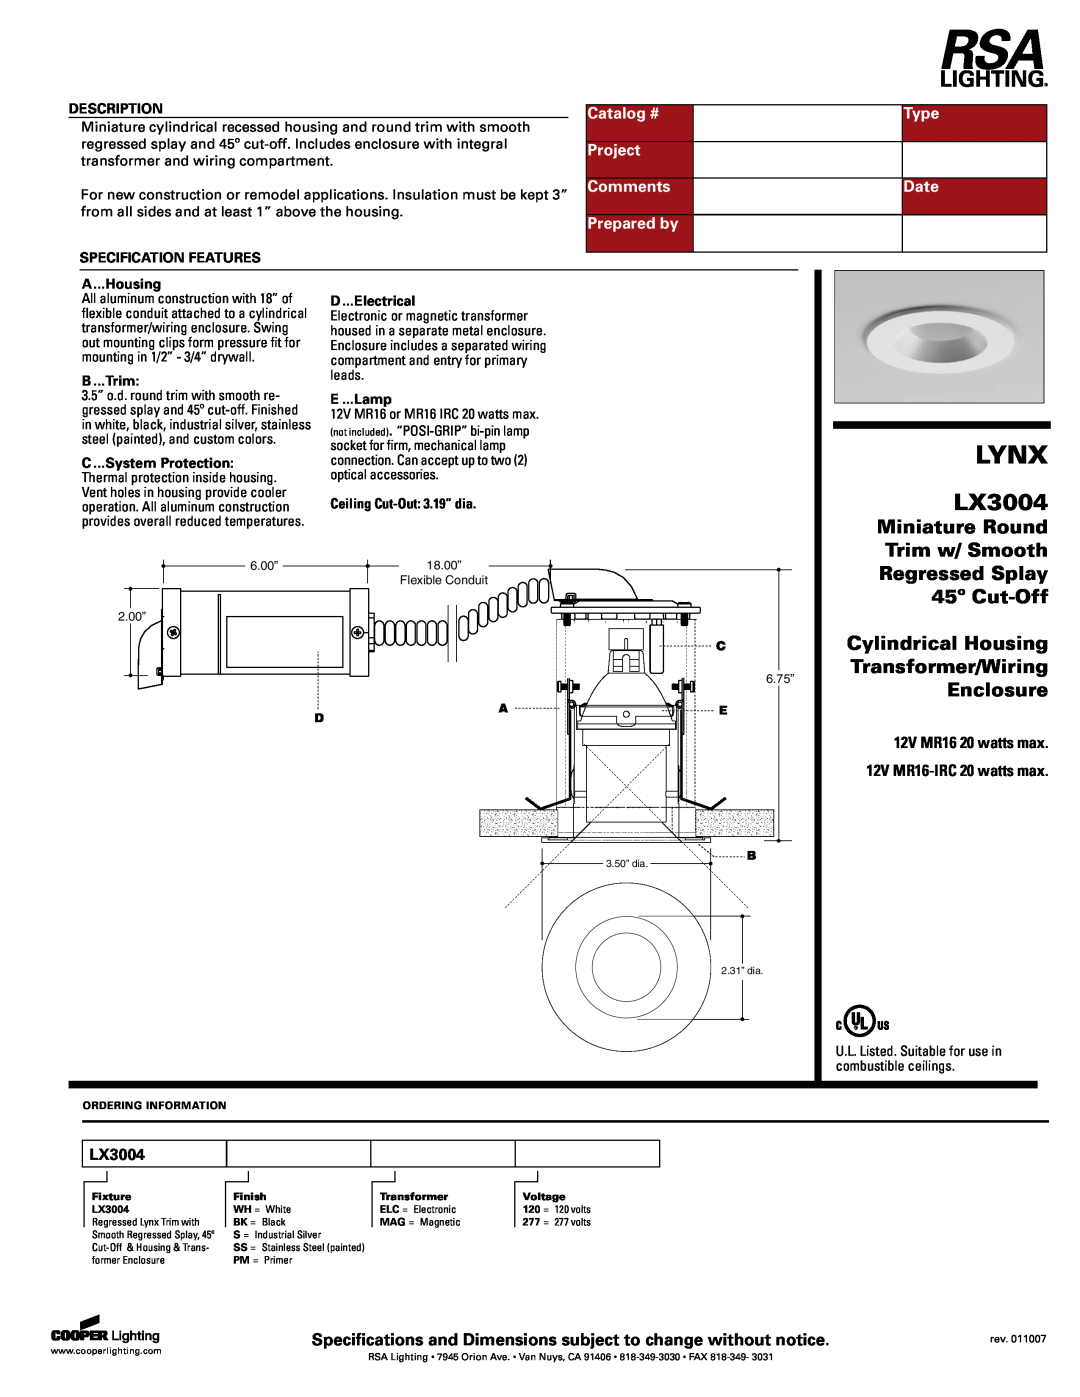 Cooper Lighting LX3004 specifications Lynx, Miniature Round, Trim w/ Smooth, Regressed Splay, 45º Cut-Off, Enclosure, Type 